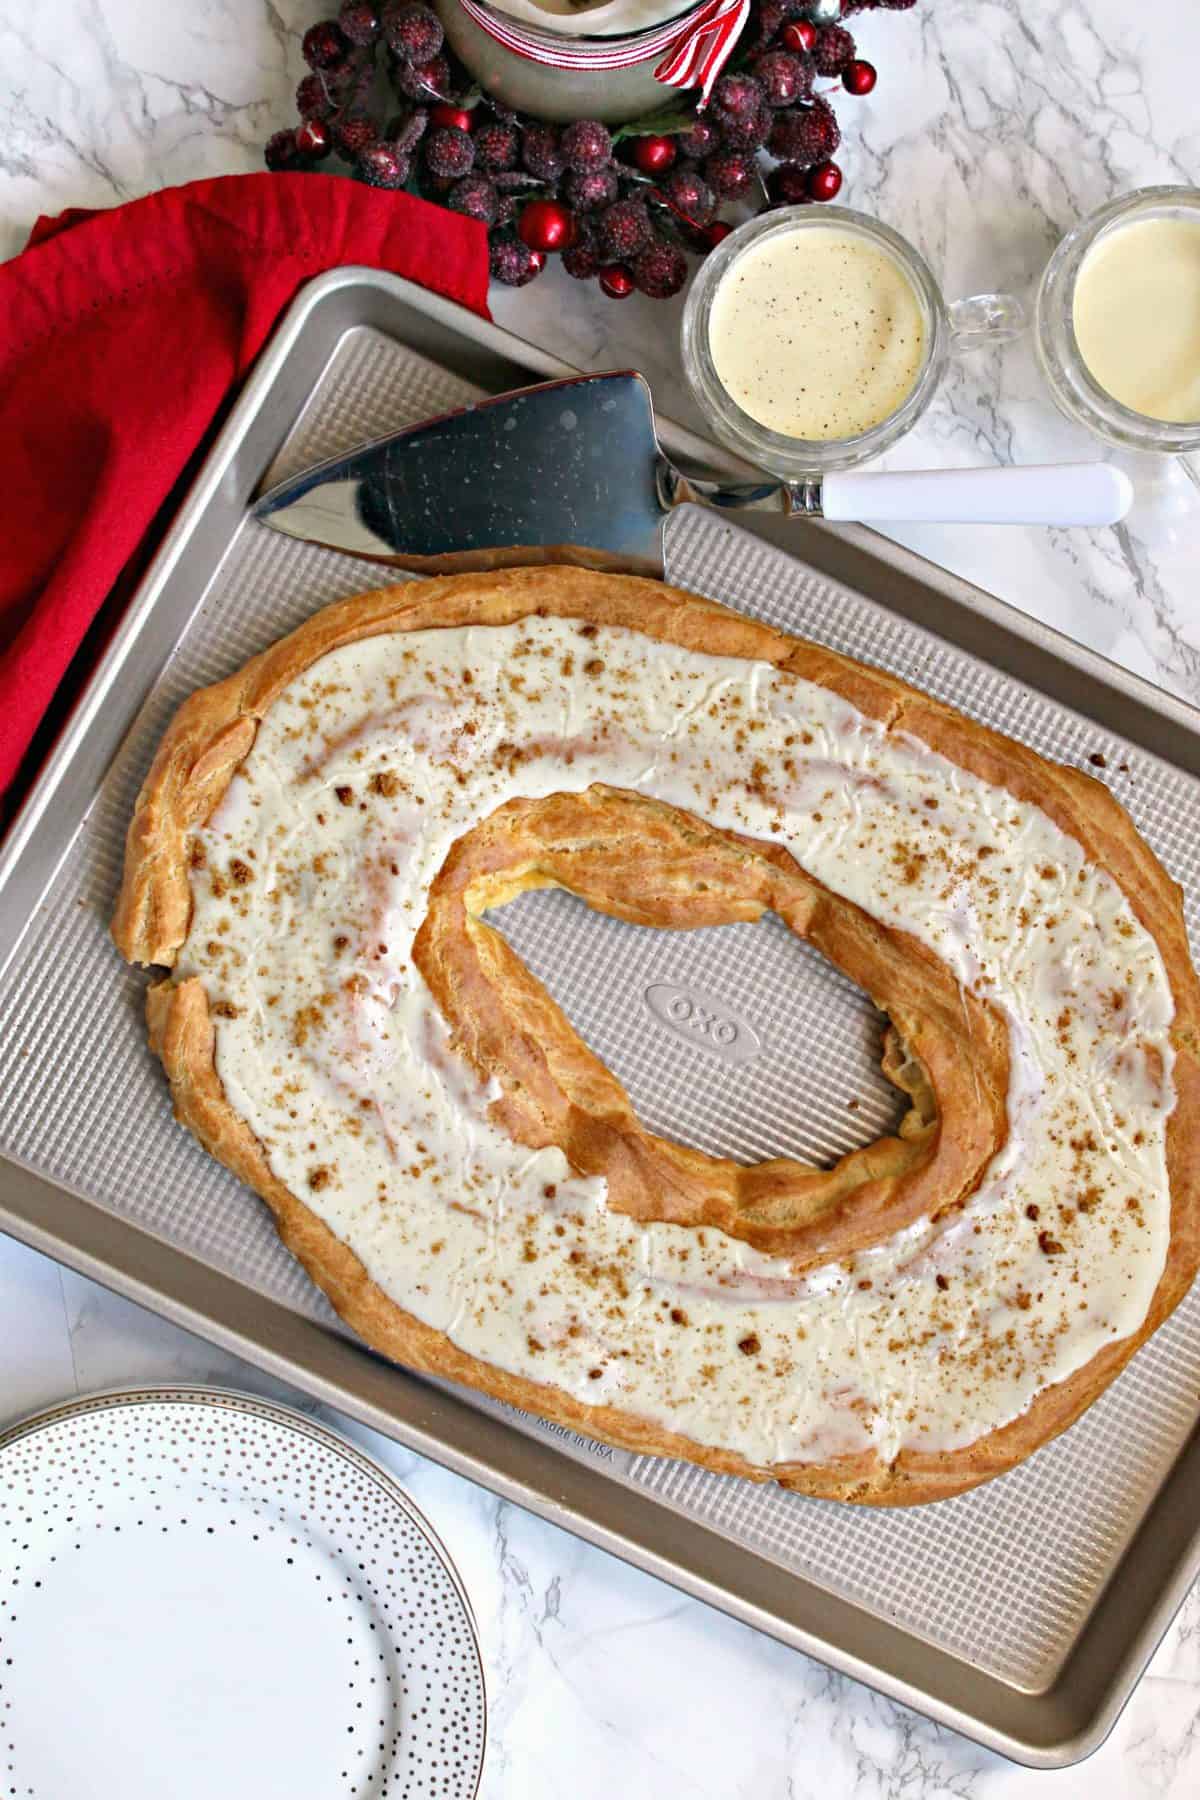 Eggnog Danish Kringle! The flavors of a favorite winter beverage shine though in this tender, glaze-covered treat that can be served for breakfast or dessert. This less labor-intensive version of the mouthwatering Danish pastry will become a holiday treat to treasure! 